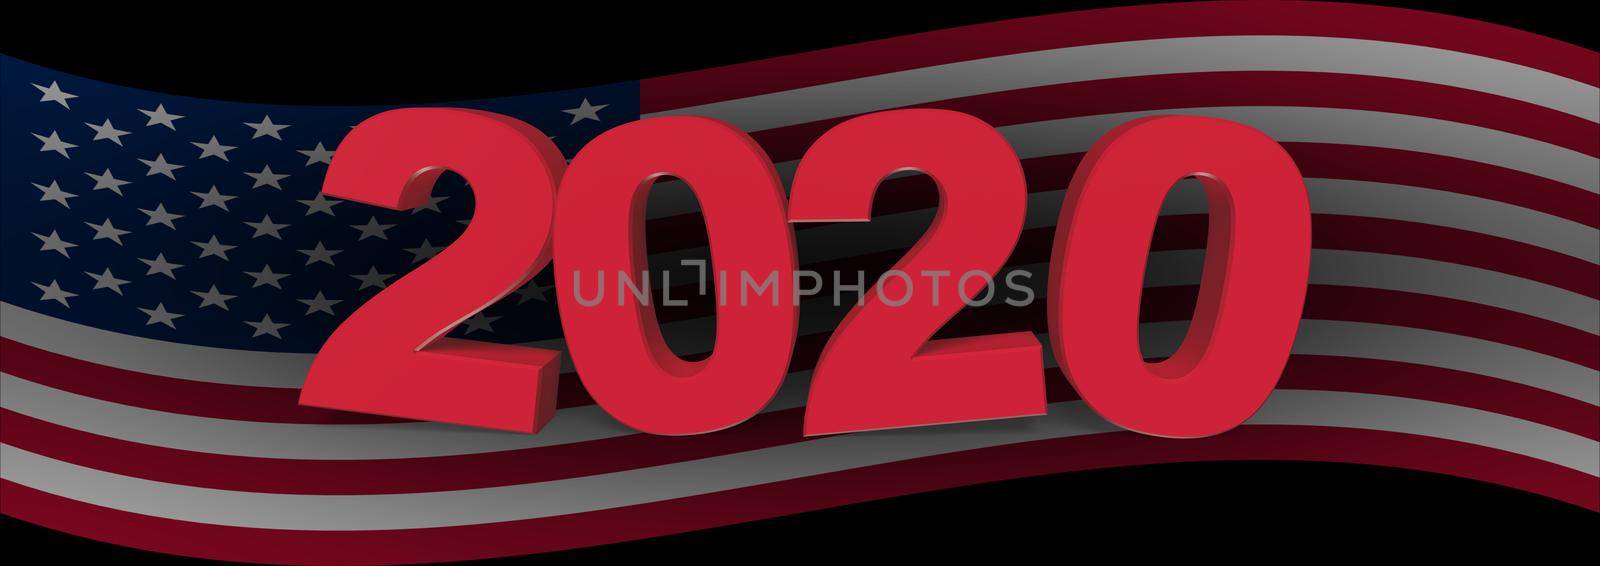 Vote presidential election 2020 in United States of America. by Taut